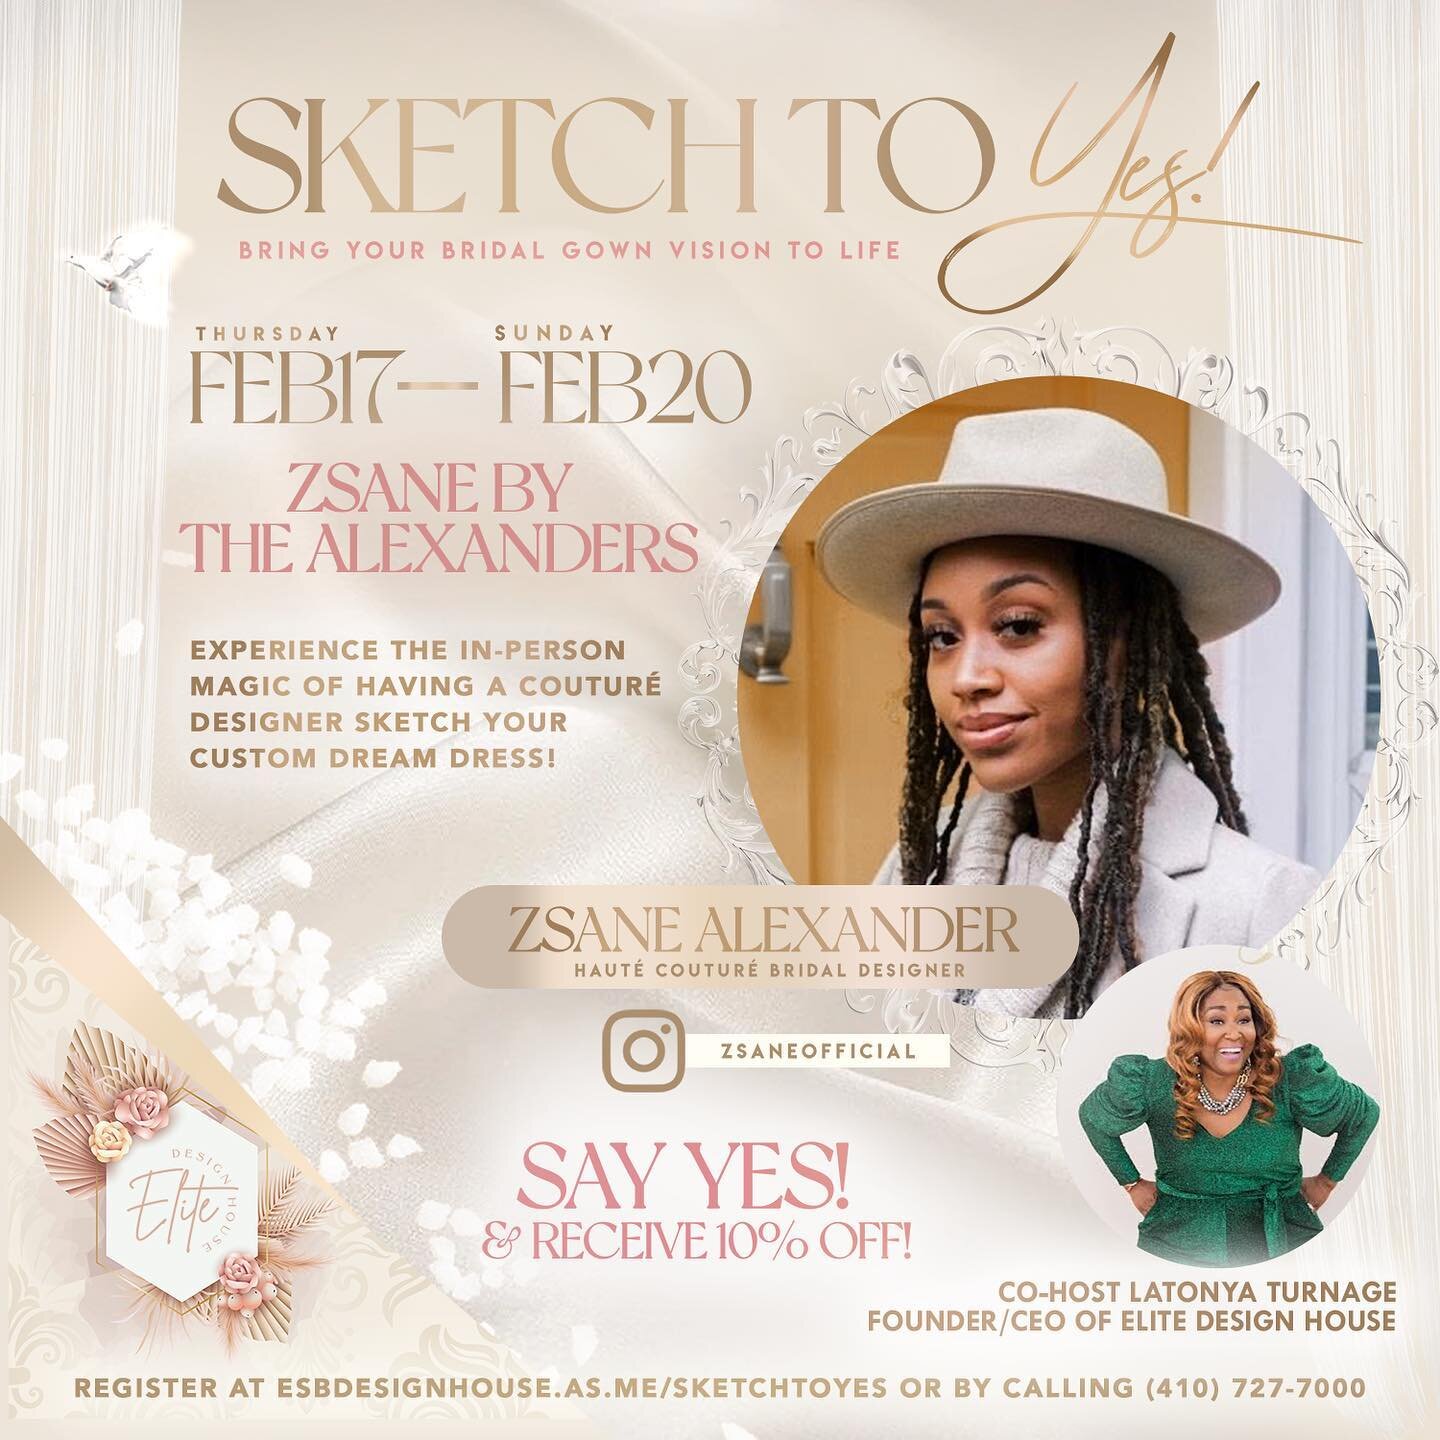 Schedule your Sketch To YES! appointment with Haut&eacute; Coutur&eacute; Designer @zsaneofficial, from Feb. 17-Feb. 20th! Experience the in-person magic of having a coutur&eacute; designer sketch your custom dream dress and bring it to life.

At you